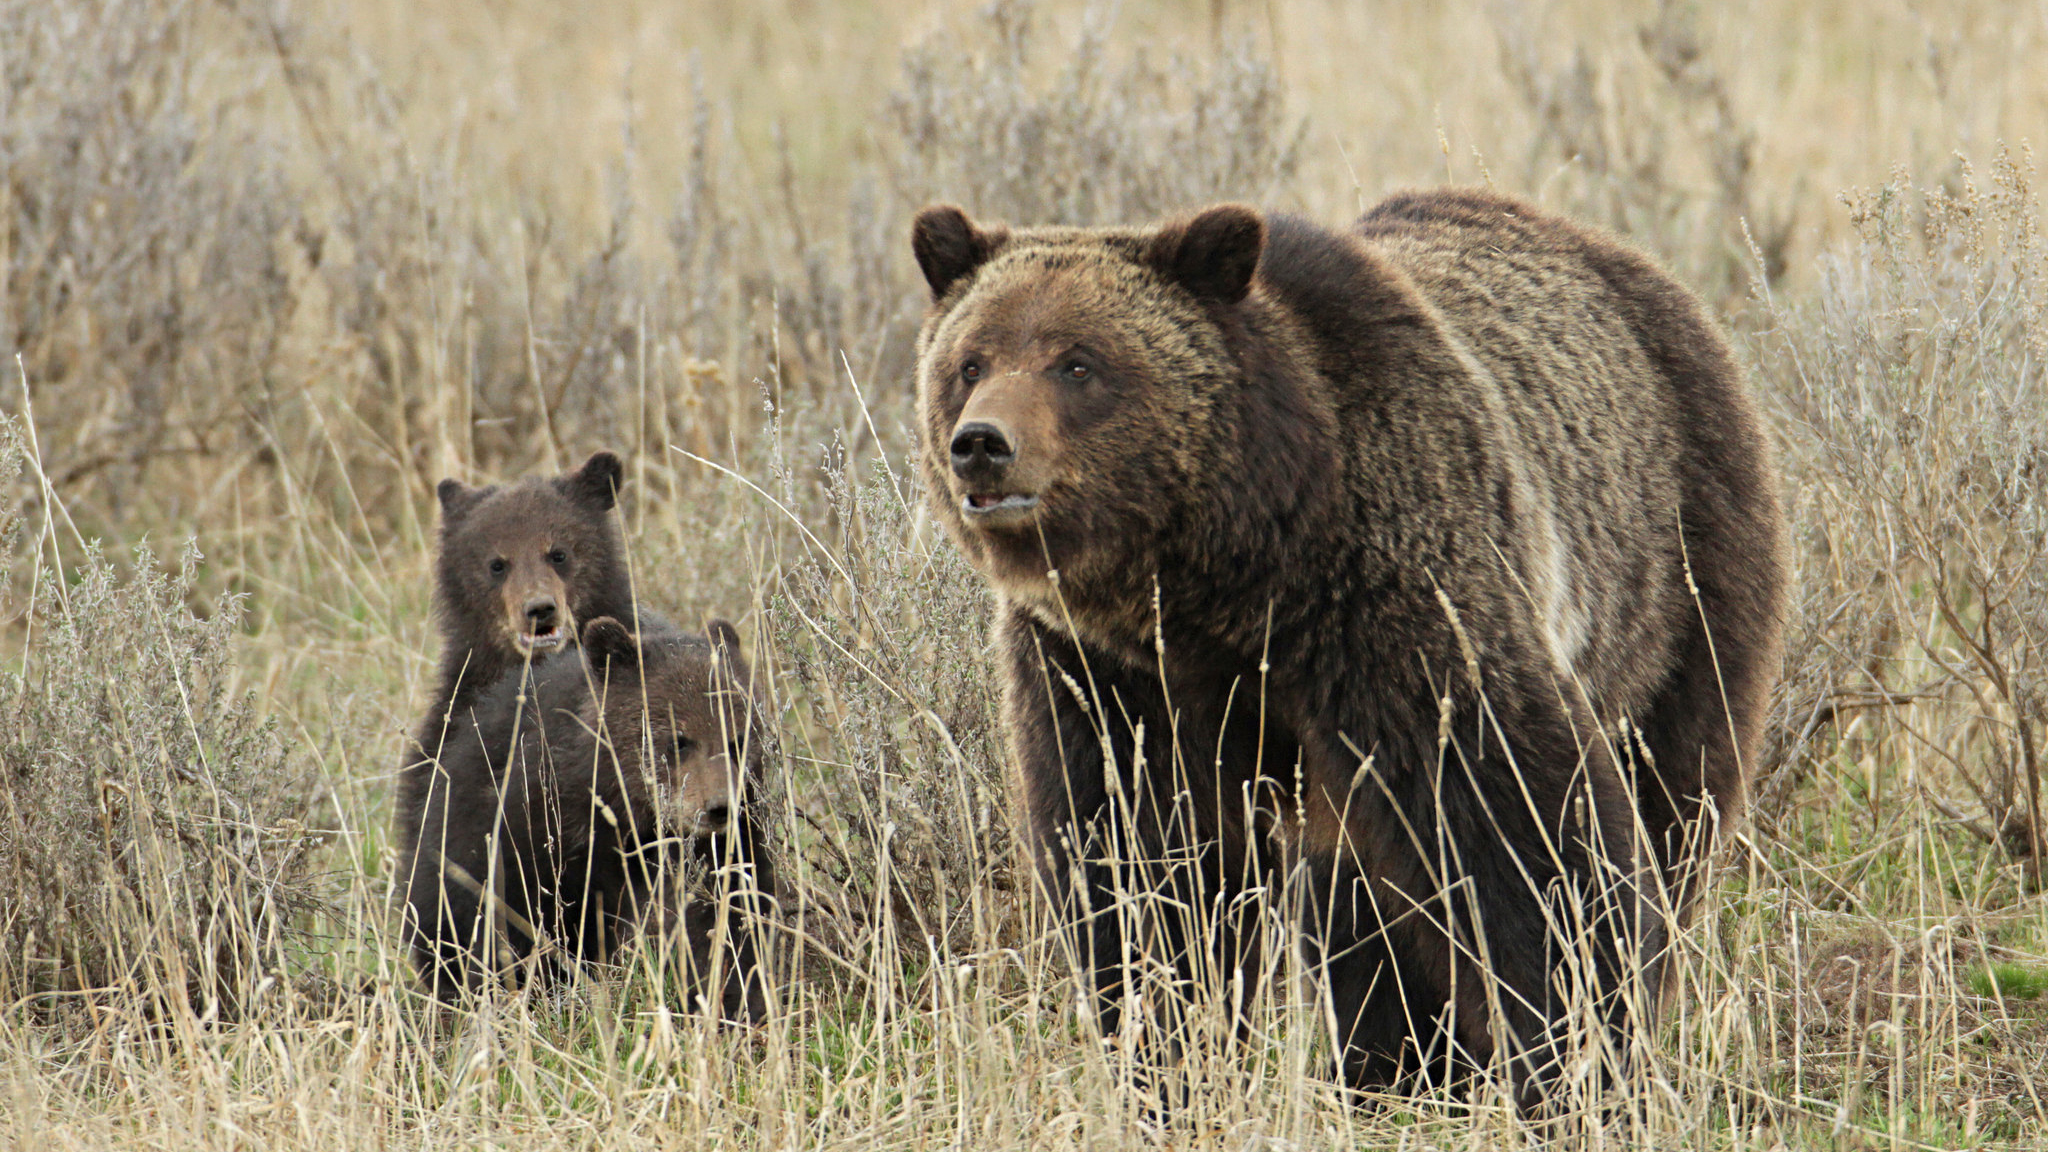 Grizzly sow and cubs near Fishing Bridge in Yellowstone. Photo by Jim Peaco / NPS in the Public Domain